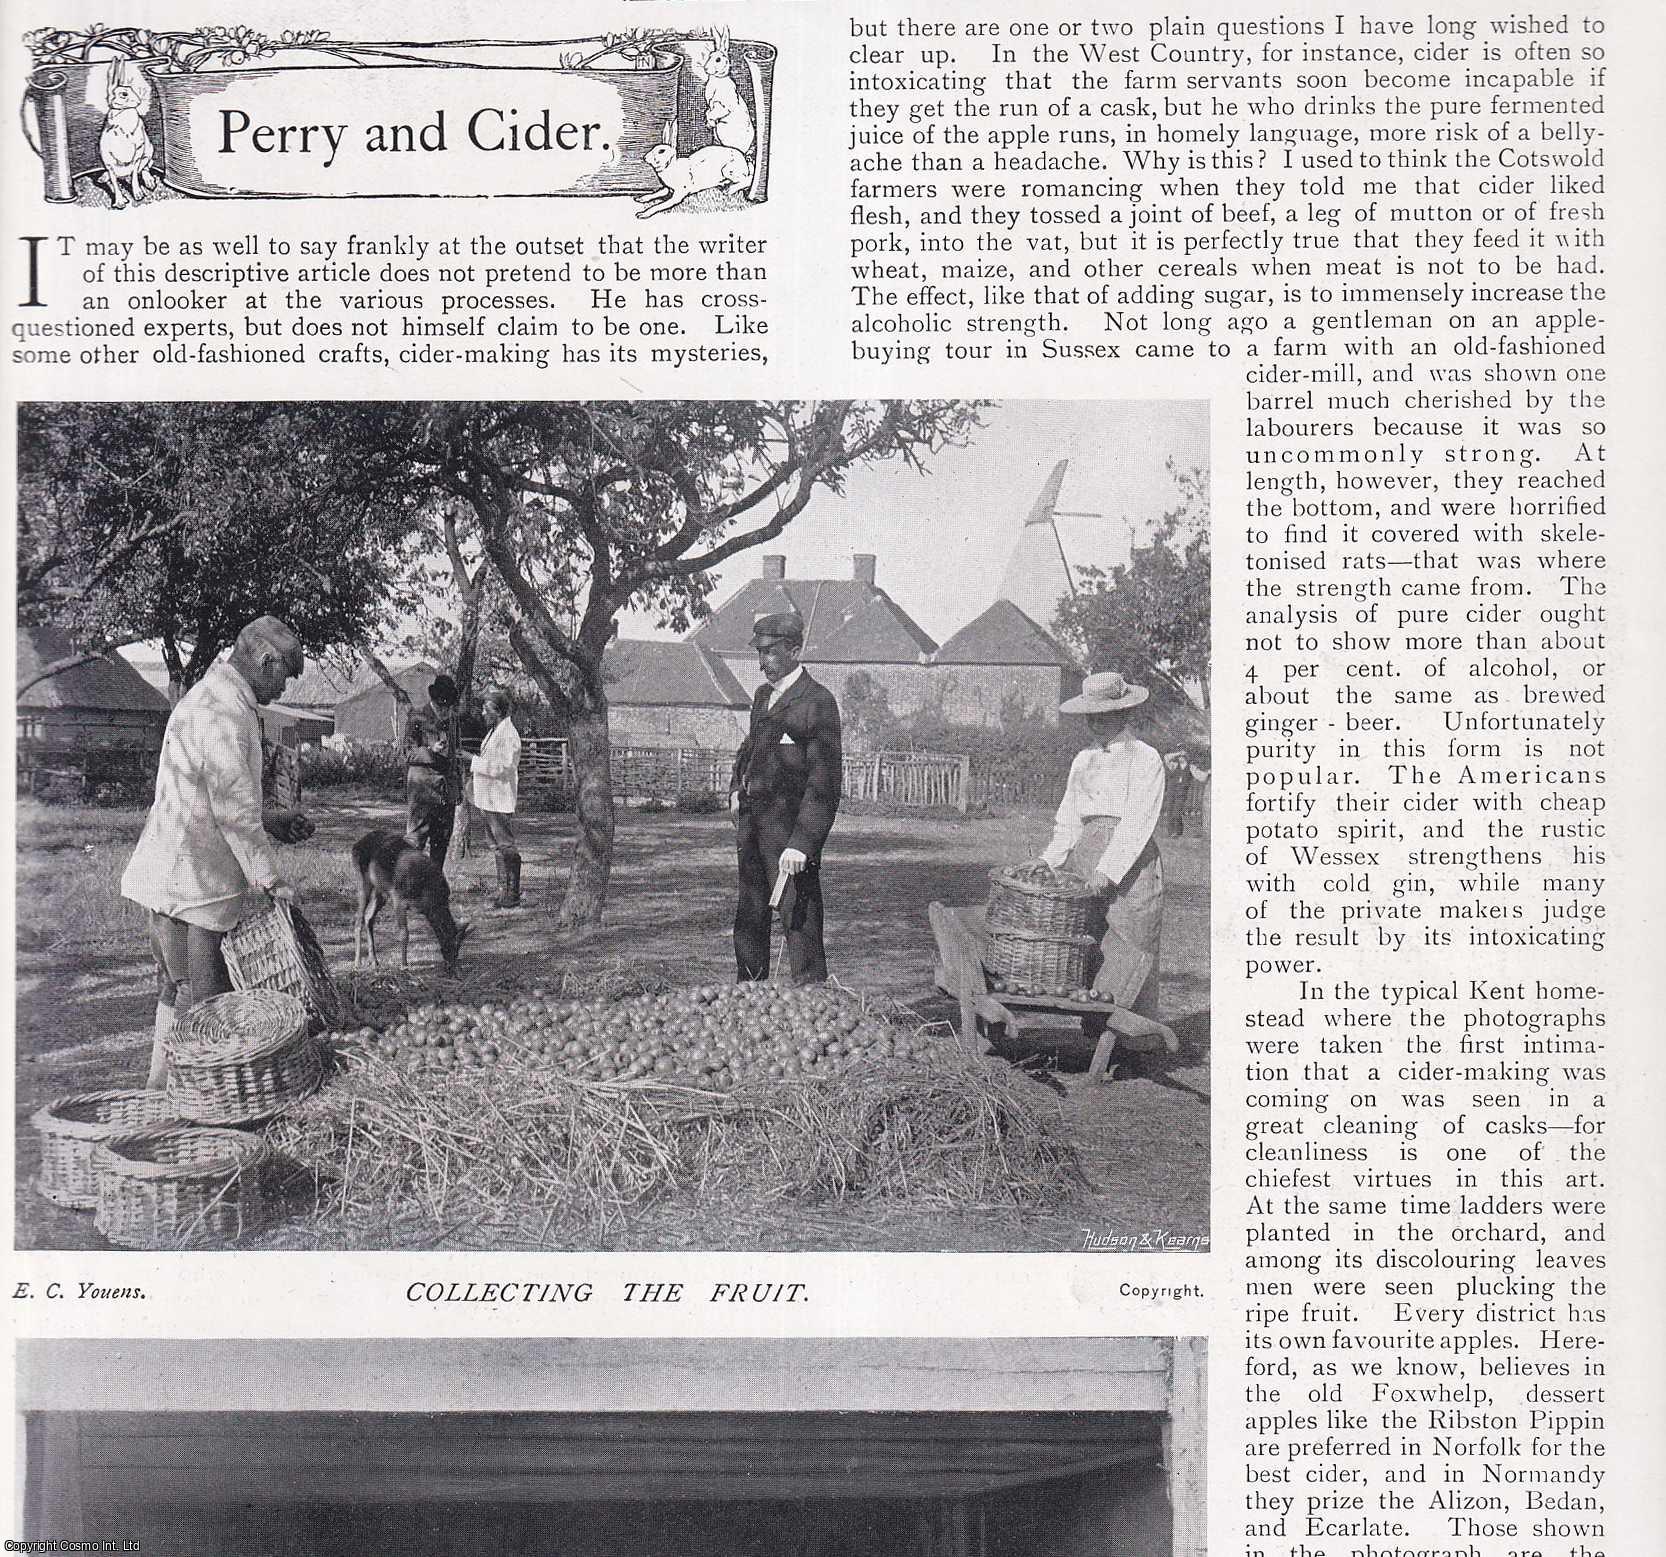 COUNTRY LIFE - Perry and Cider Making. Several pictures and accompanying text, removed from an original issue of Country Life Magazine, 1898.